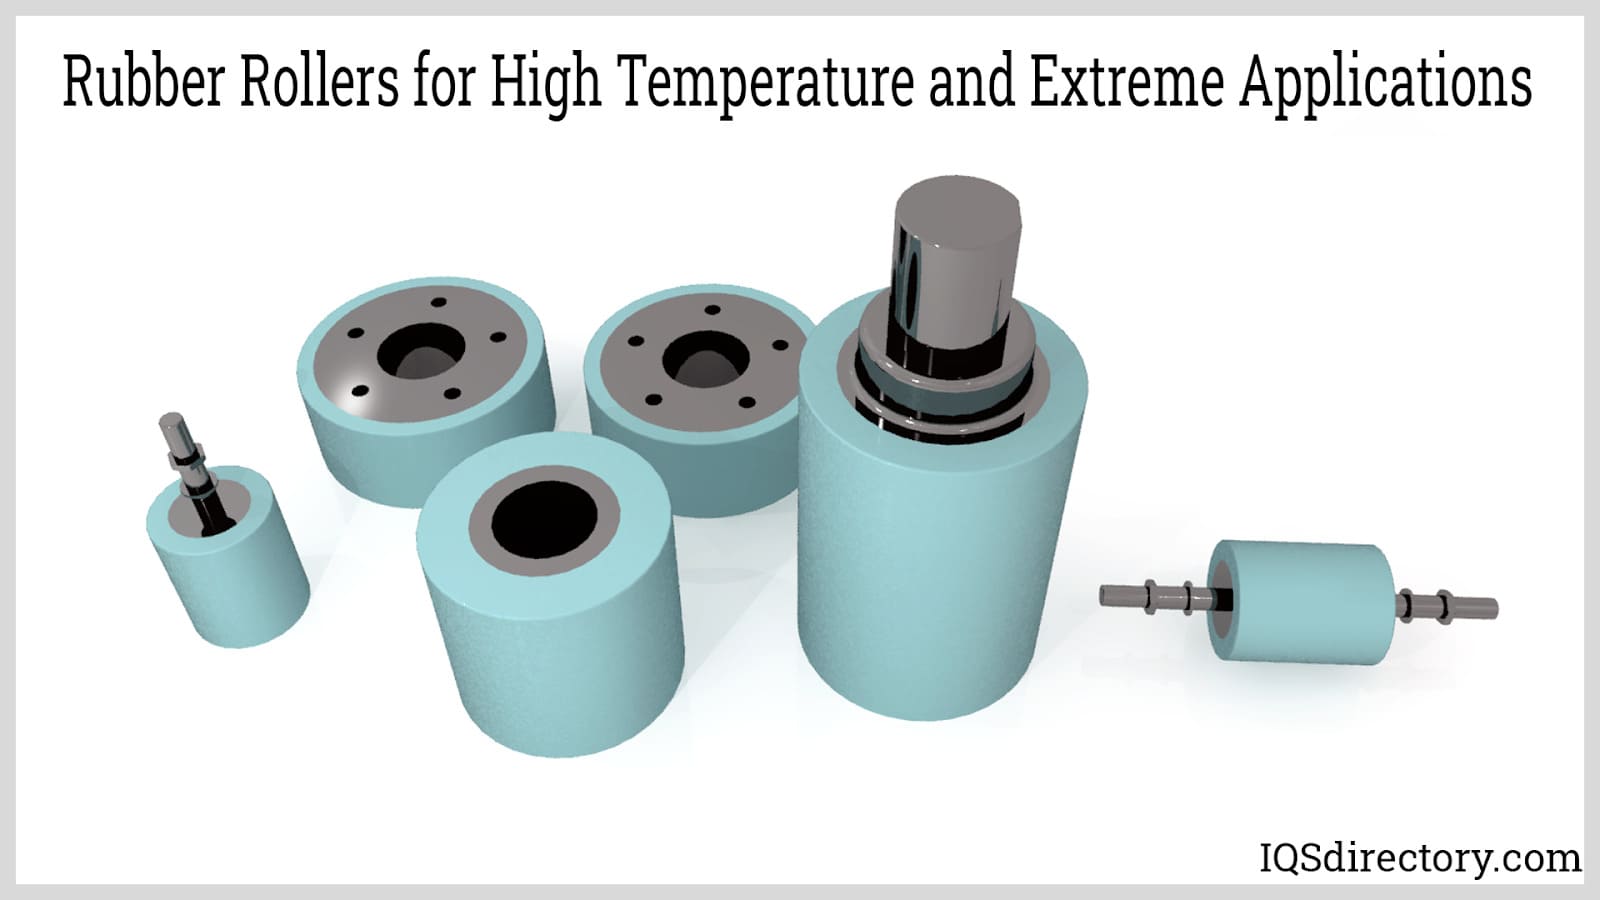 Rubber Rollers for High Temperature and Extreme Applications